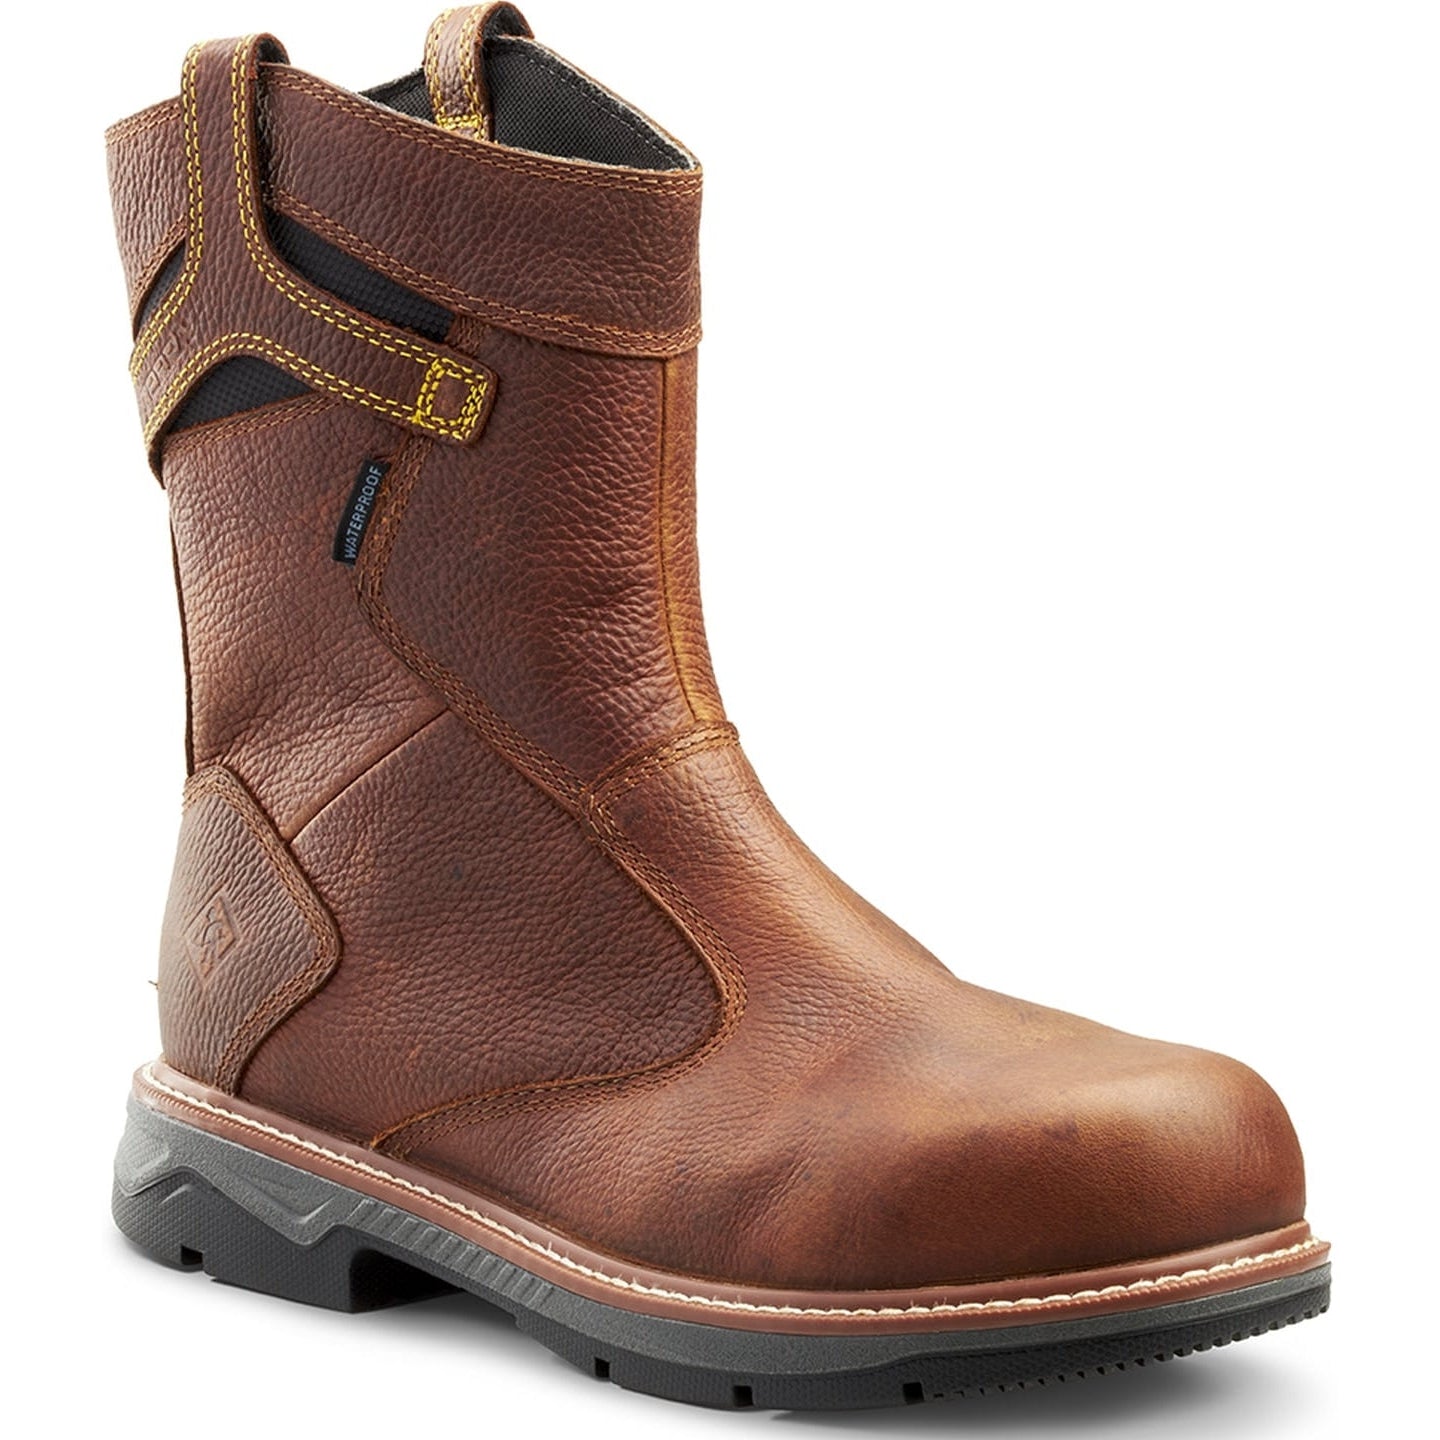 Terra Men's Patton AT Waterproof Pull-On Safety Work Boot -Brown- 4TCBBN 7 / Wide / Brown - Overlook Boots